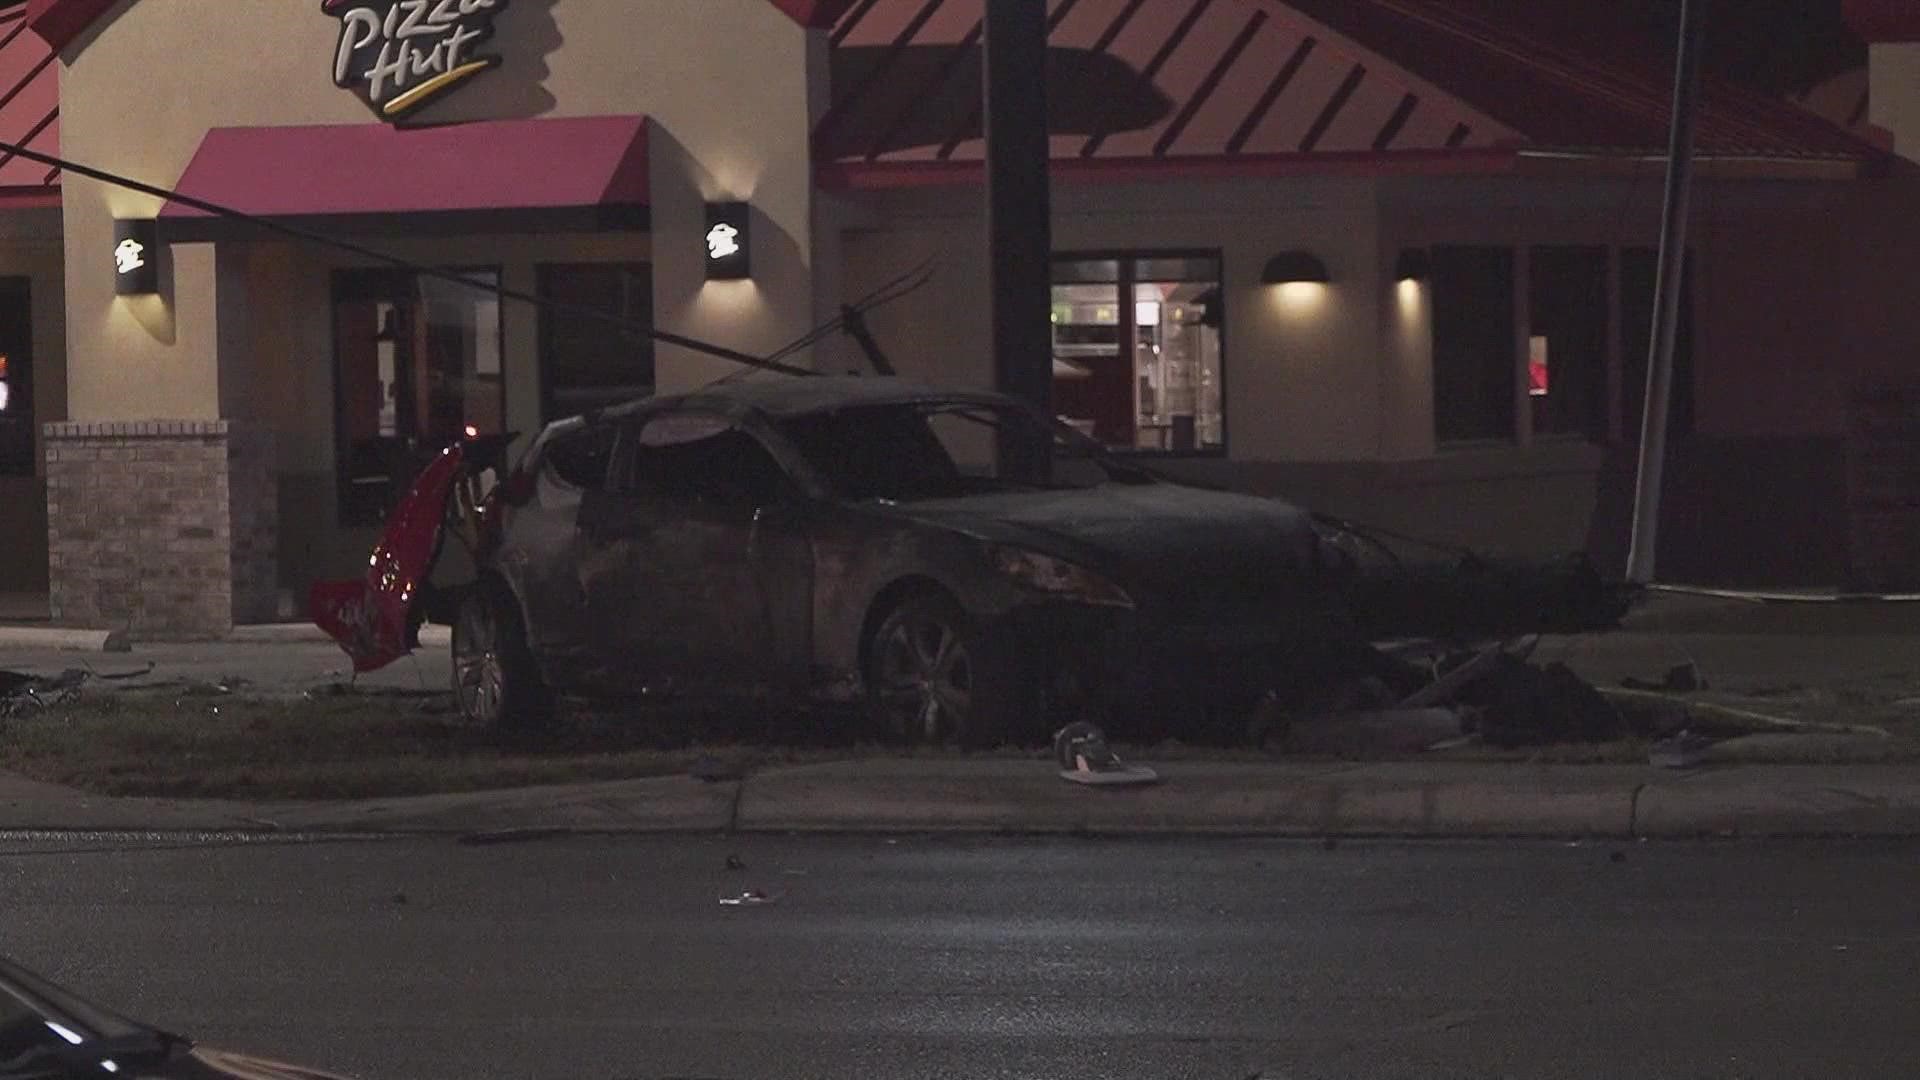 The driver crashed into a utility pole and the car caught on fire.